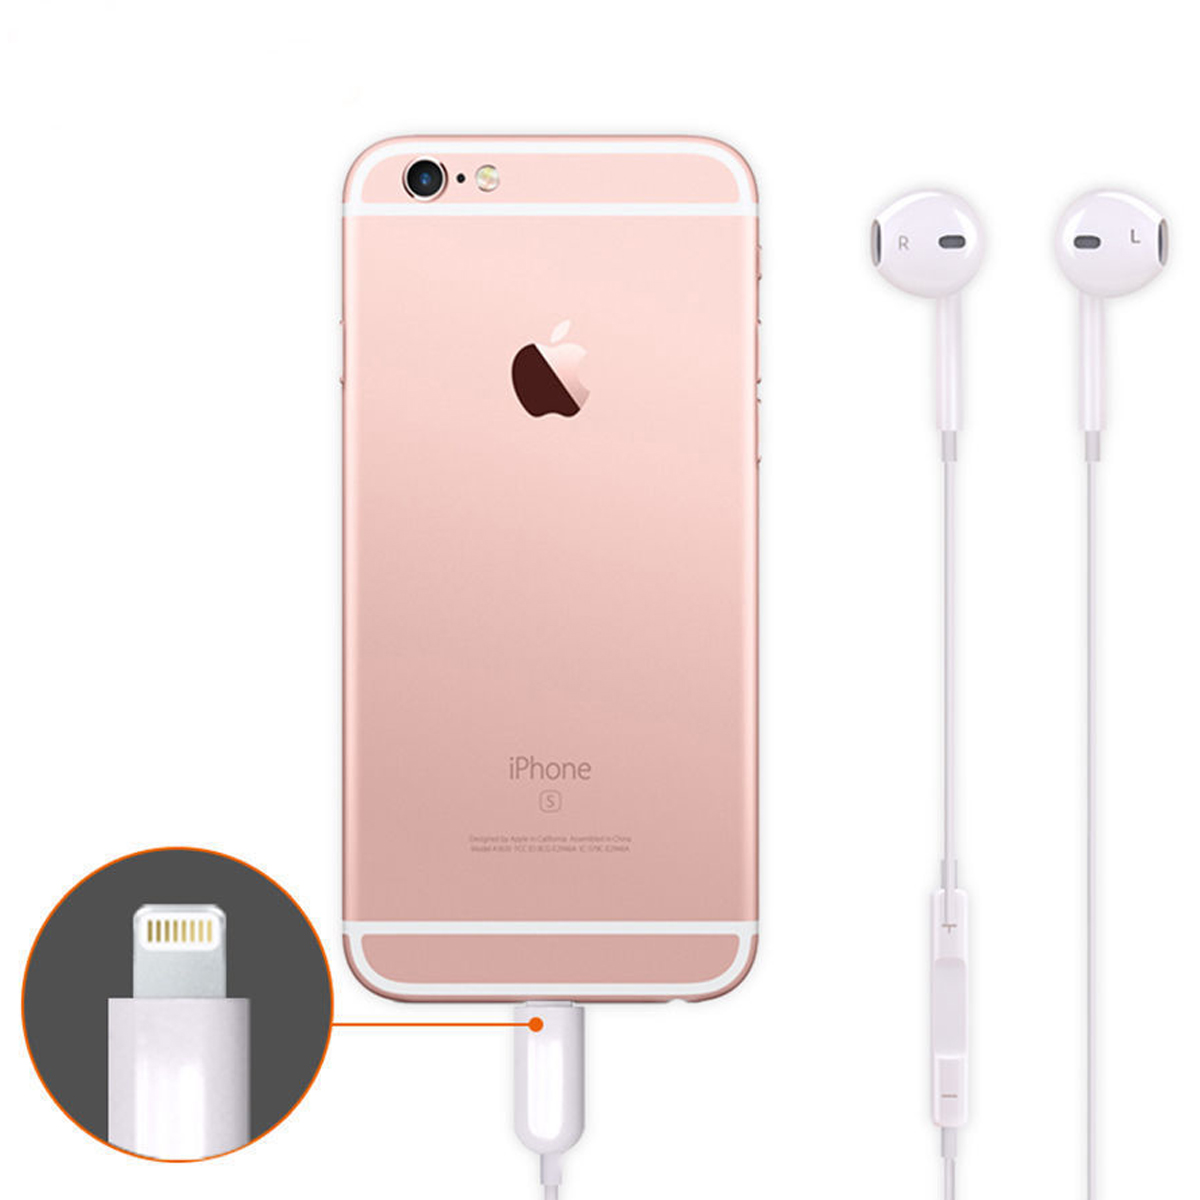 earpods with lightning connector iphone 8